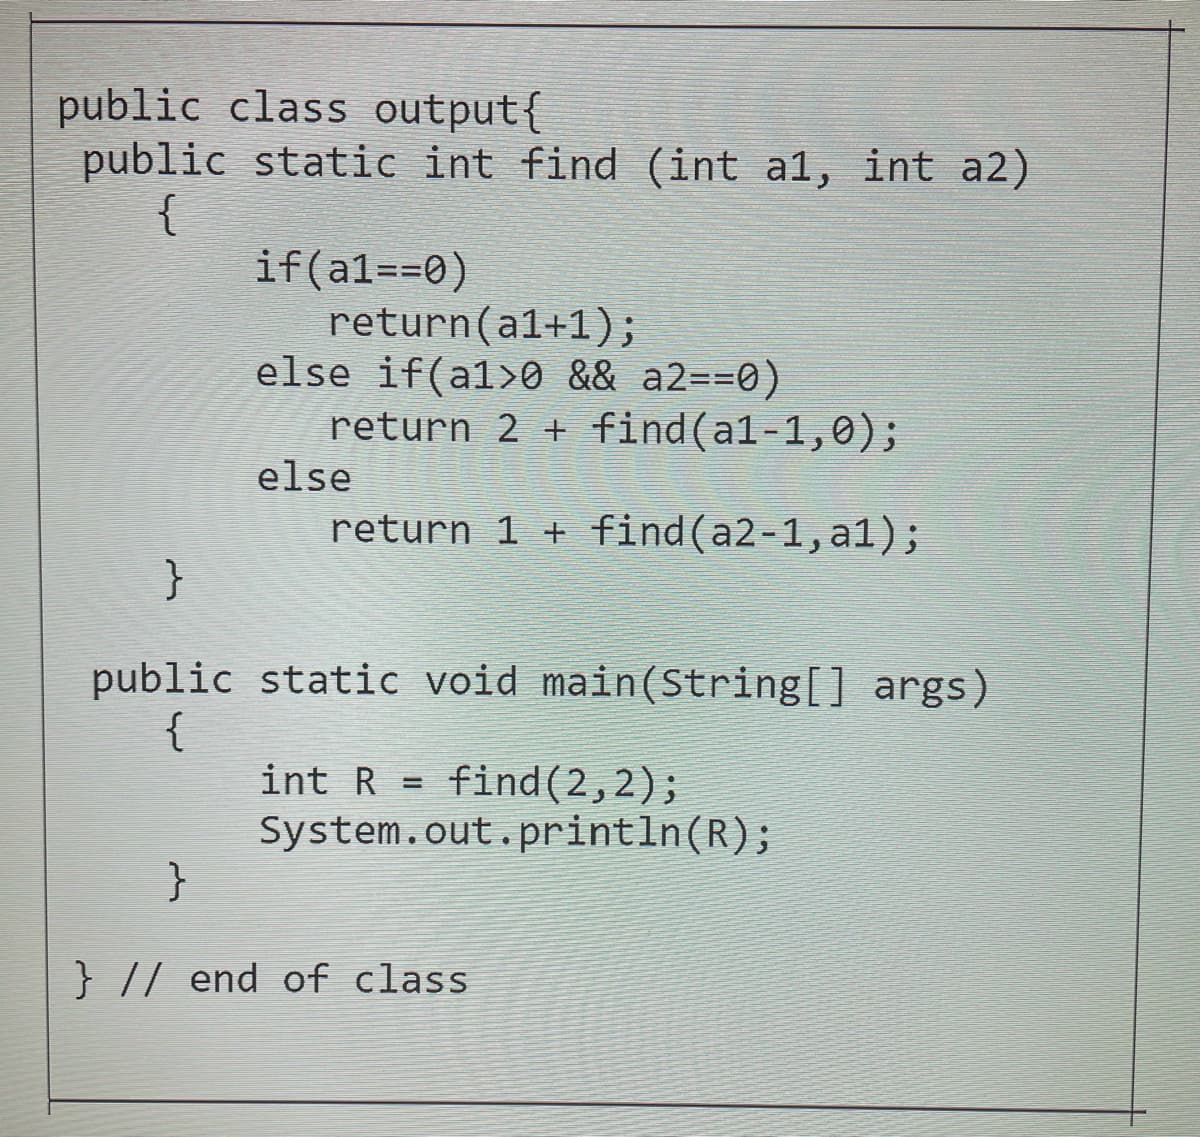 public class output{
public static int find (int a1, int a2)
{
if(a1==0)
return(a1+1);
else if(a1>0 && a2==0)
return 2 + find(a1-1,0);
else
return 1 + find(a2-1,a1);
public static void main(String[] args)
{
int R = find(2,2);
System.out.println(R);
}
} // end of class
